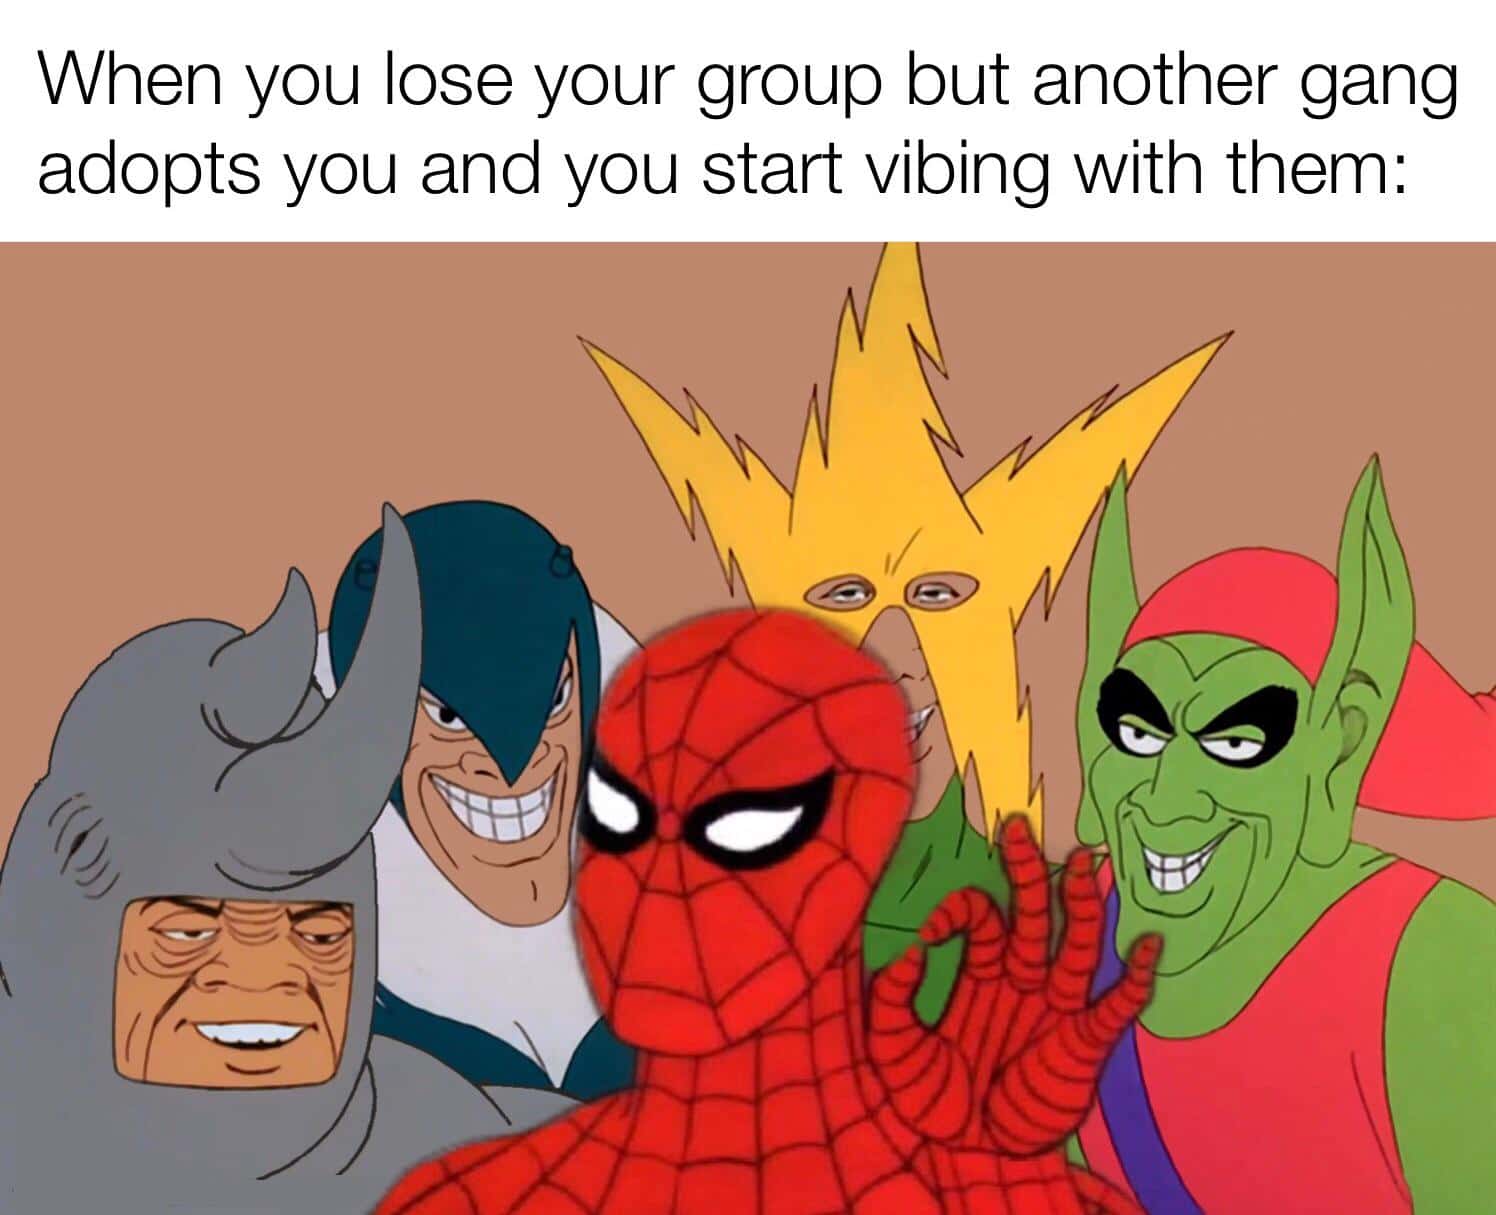 Wholesome memes, Spiderman, OK, Harry Potter Wholesome Memes Wholesome memes, Spiderman, OK, Harry Potter text: When you lose your group but another gang adopts you and you start vibing with them: 